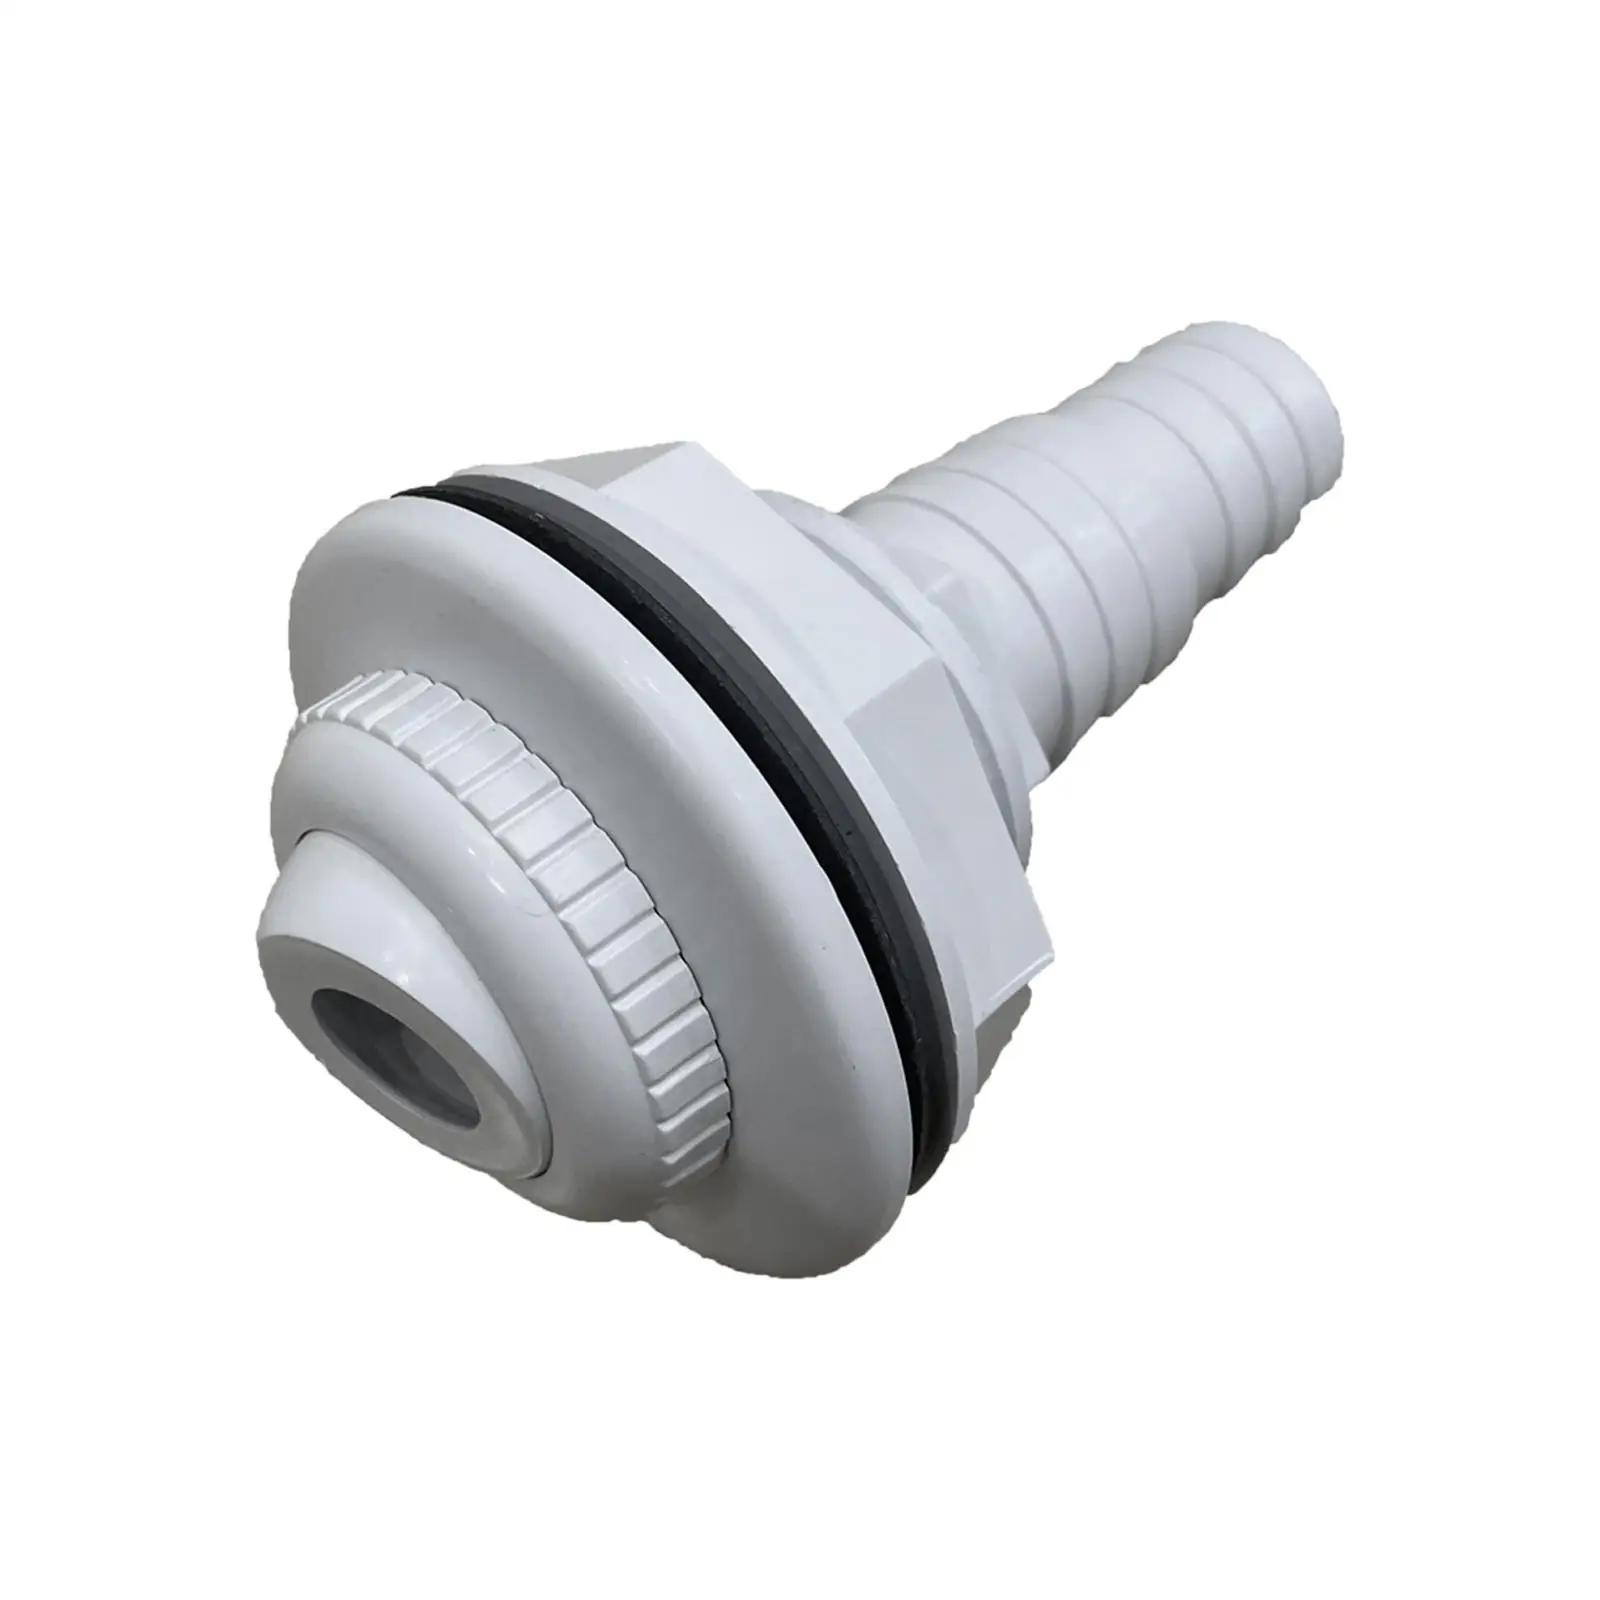 Complete Return Inlet Jet Fittings Parts Durable with Gasket and Adapter Replacement. 1/2`` Easy to Install for Ground Pool